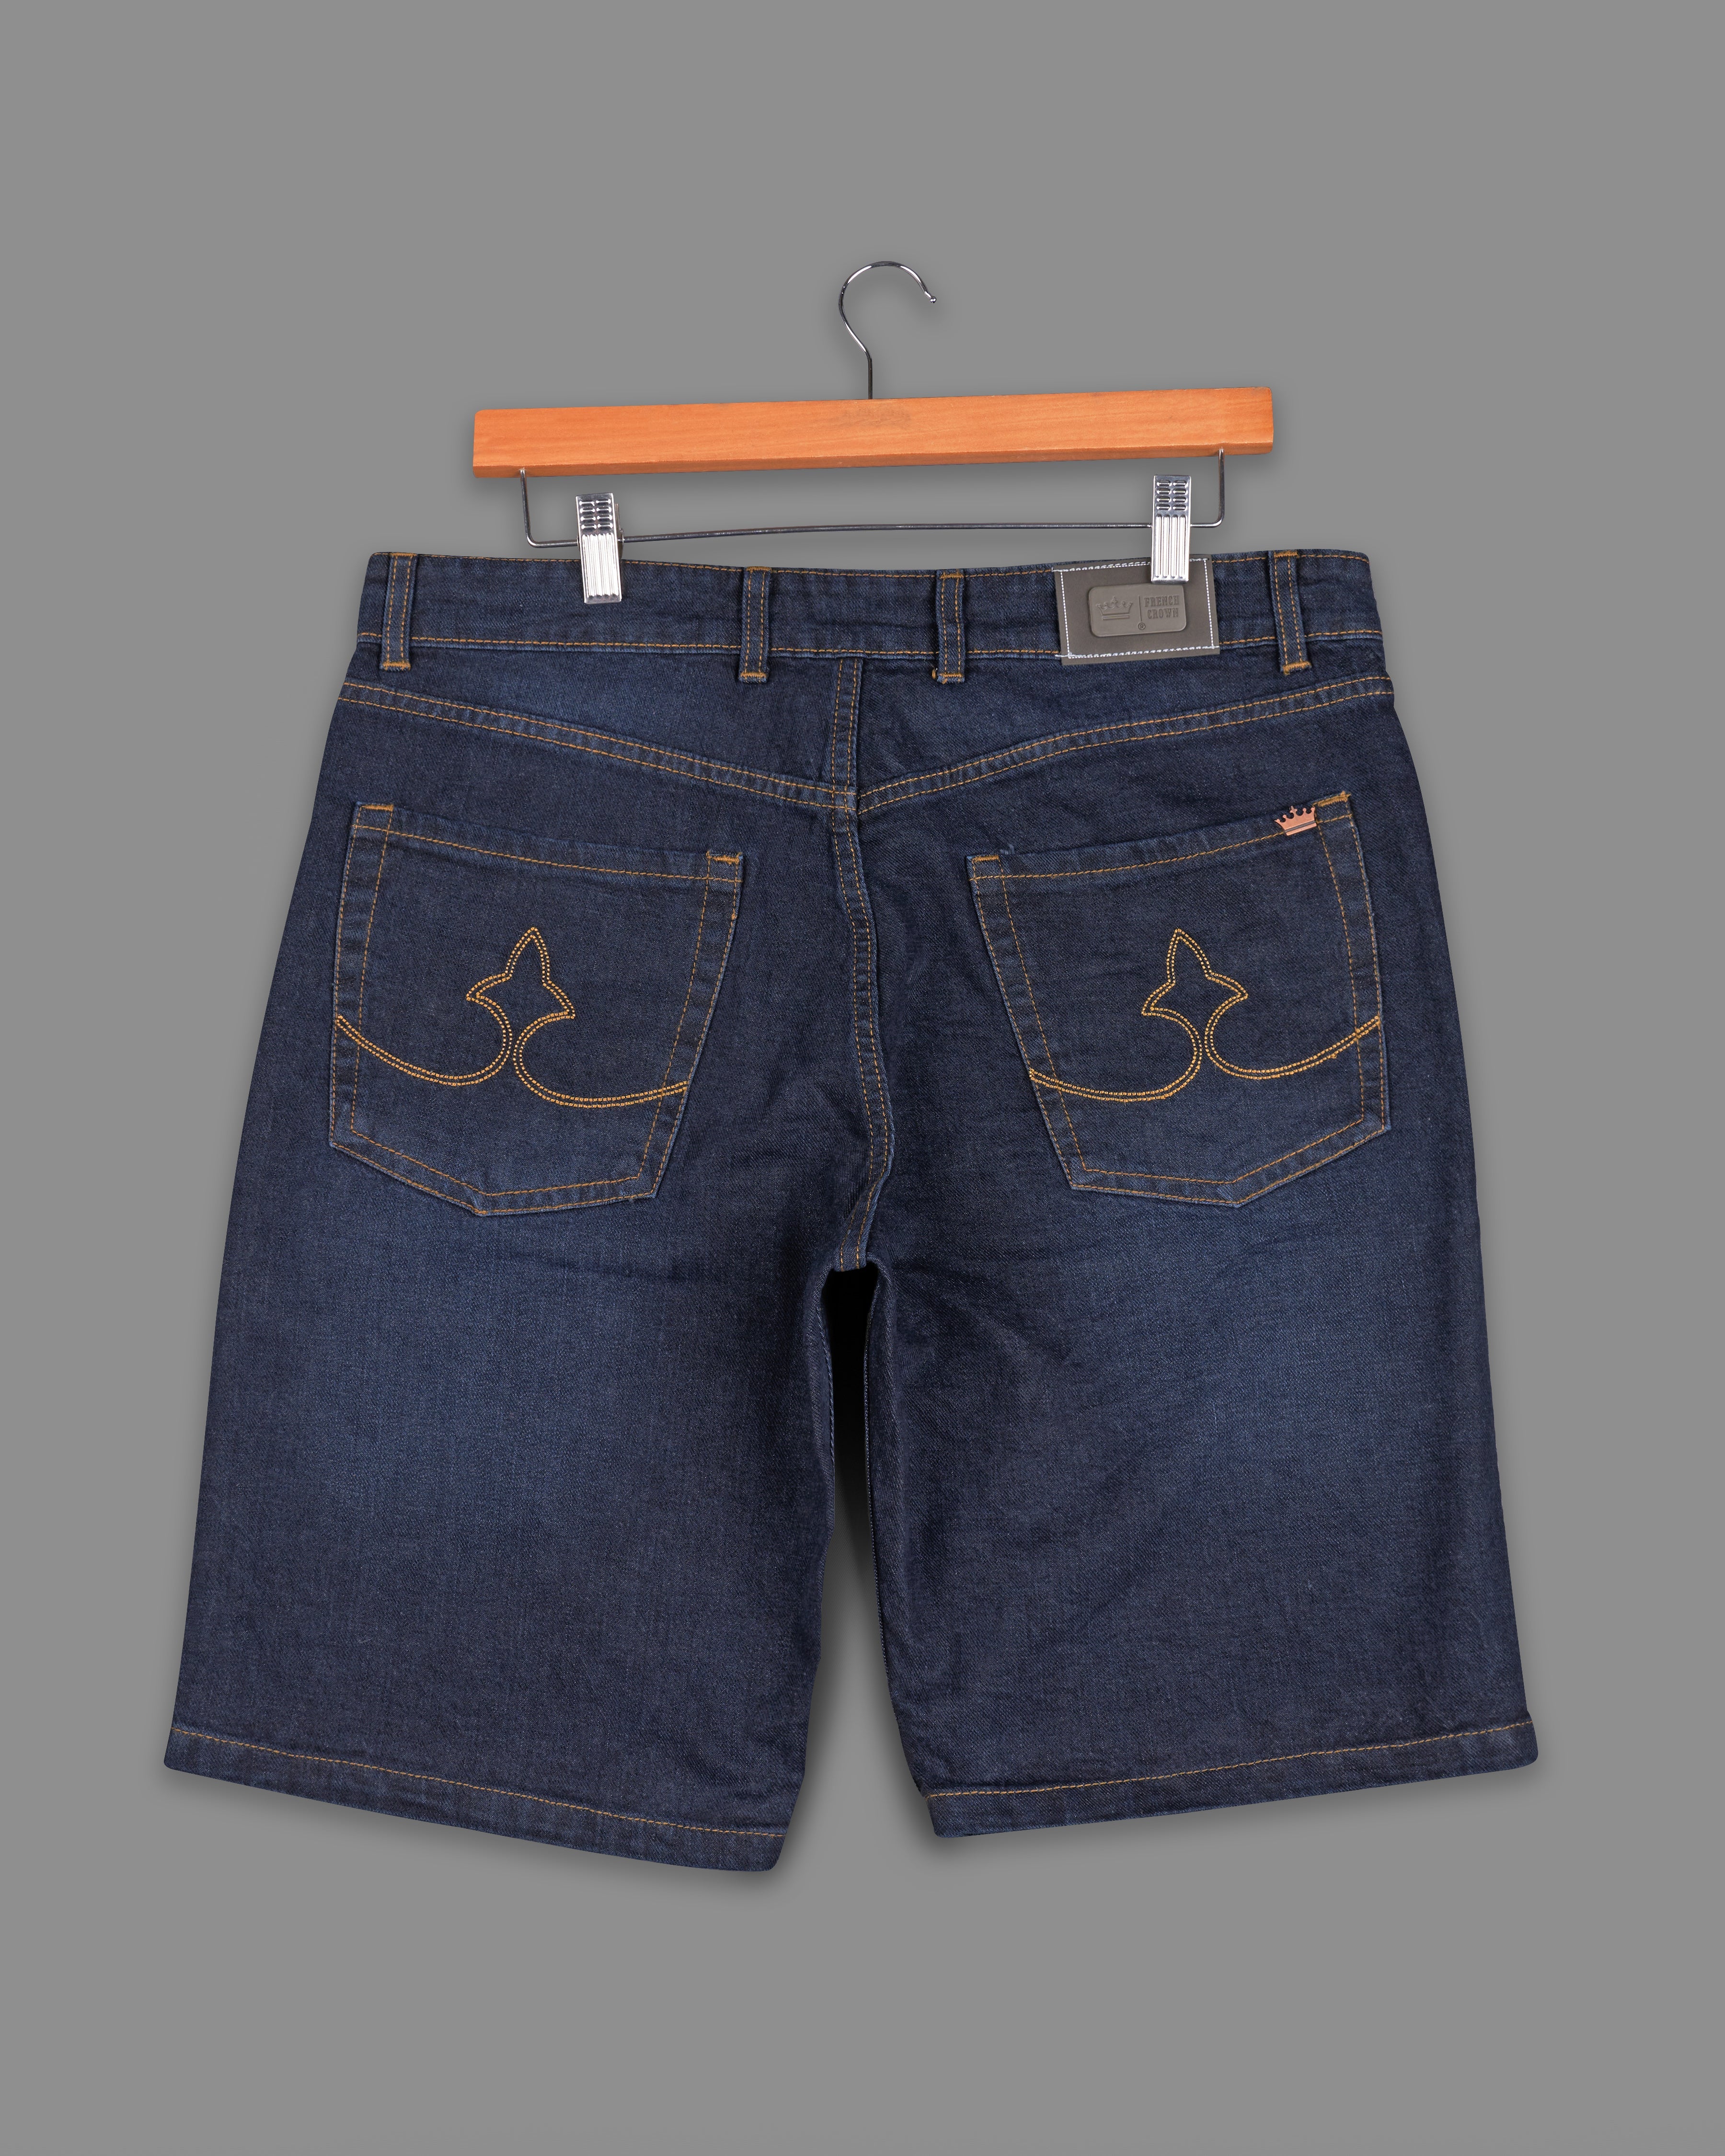 Martinique Blue Mildly Distressed Whiskering Wash Denim Shorts SR219-28, SR219-30, SR219-32, SR219-34, SR219-36, SR219-38, SR219-40, SR219-42, SR219-44